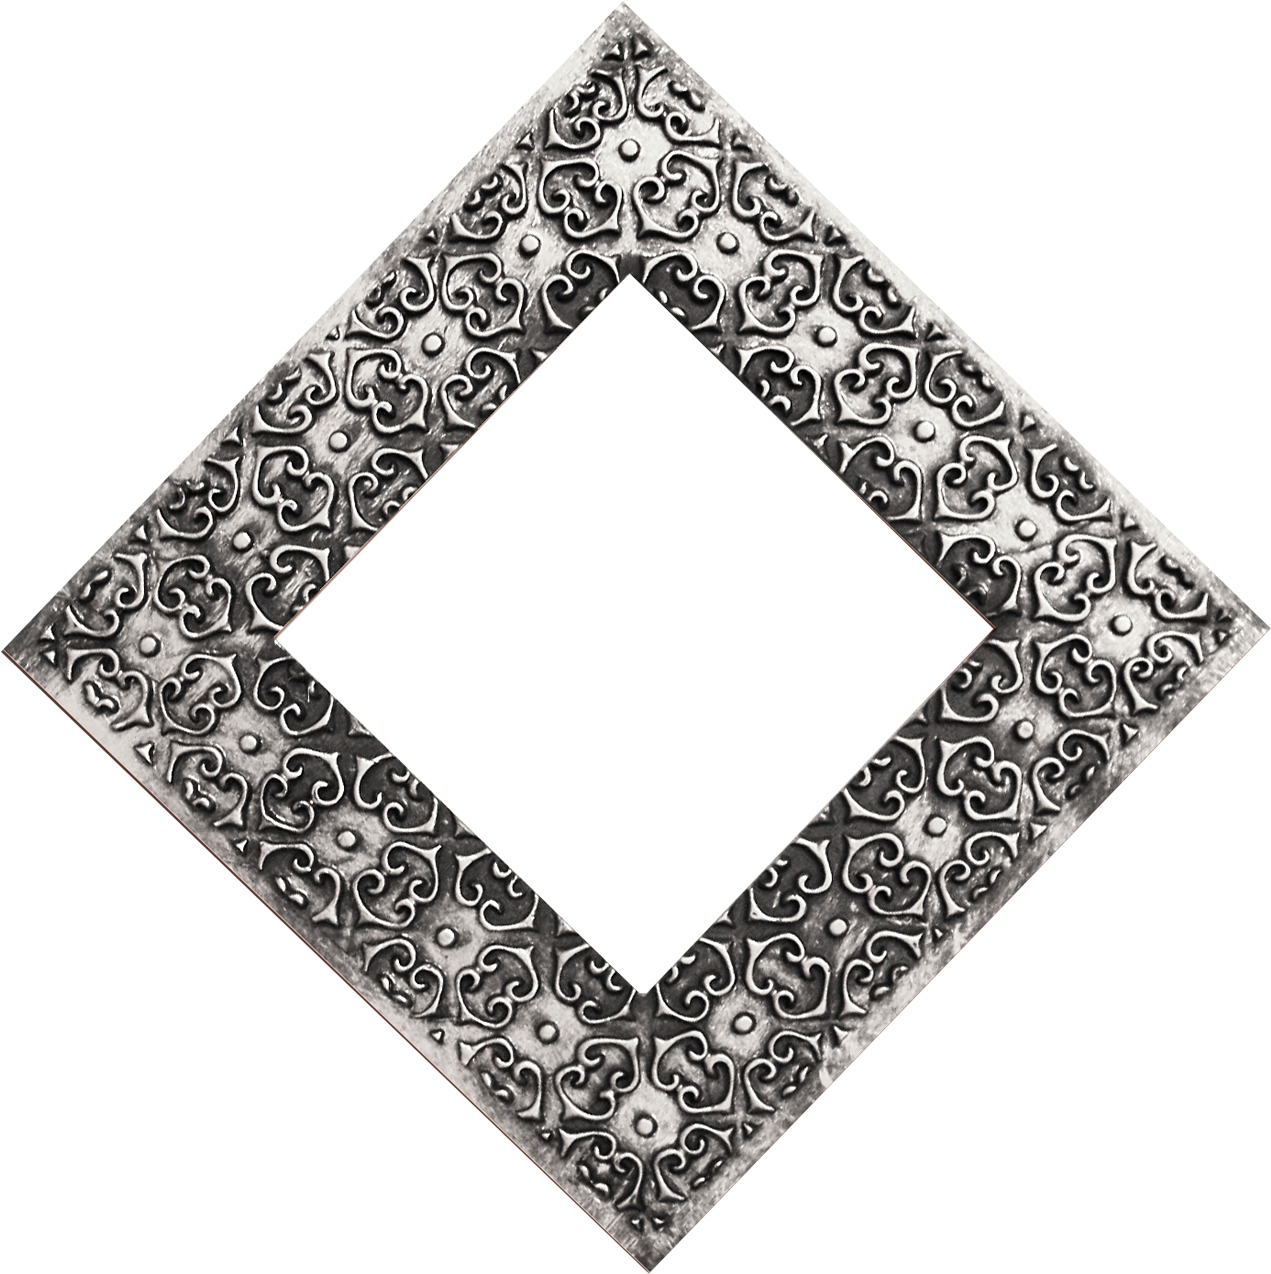 Ornate Silver Frame Png Image - Portable Network Graphics (1334x1346), Png Download